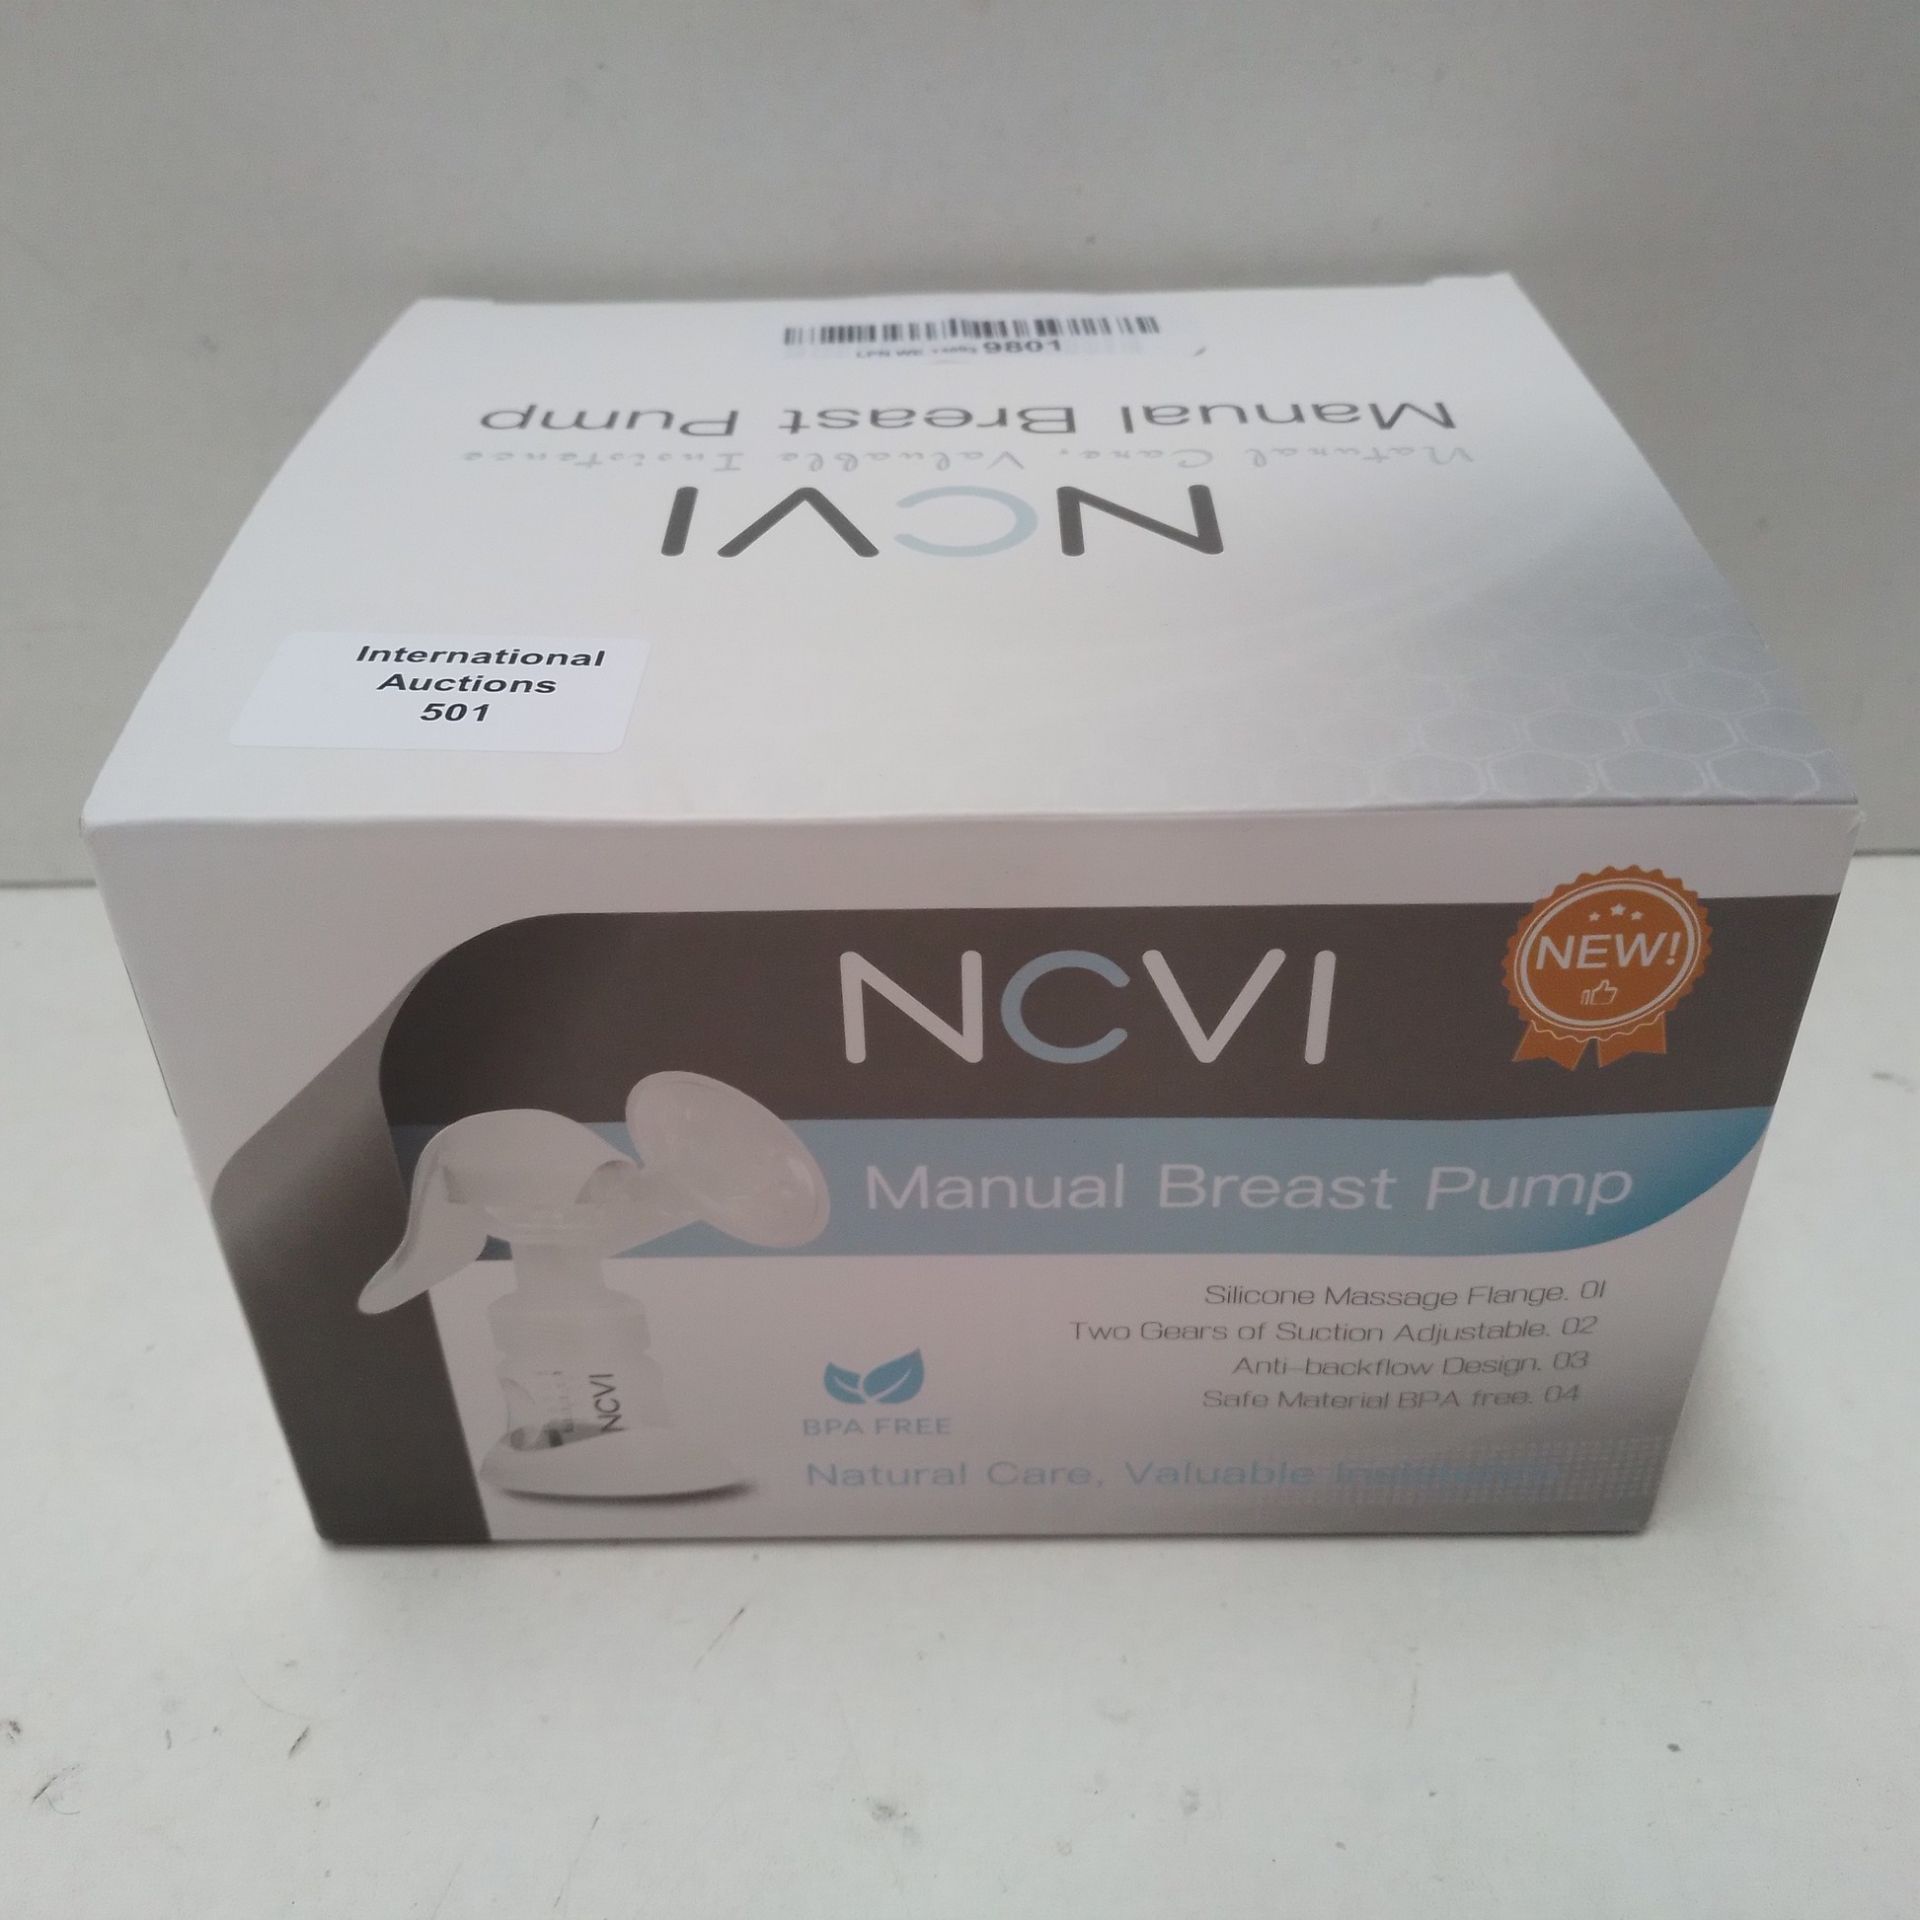 RRP £13.94 NCVI Manual Breast Pump with Milk Bottle - Image 2 of 2